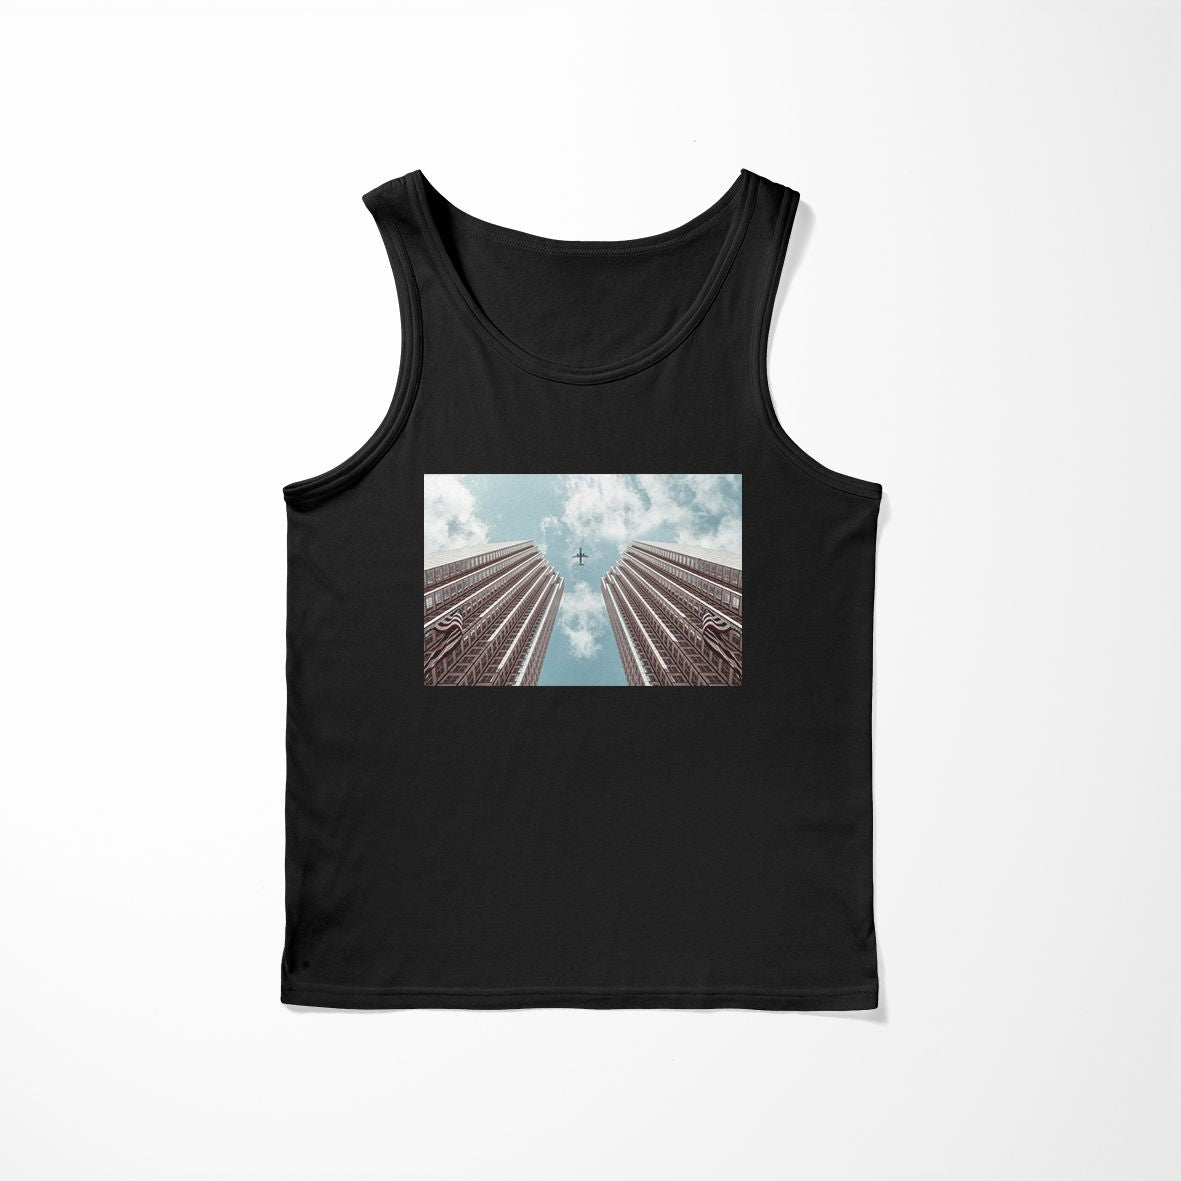 Airplane Flying over Big Buildings Designed Tank Tops